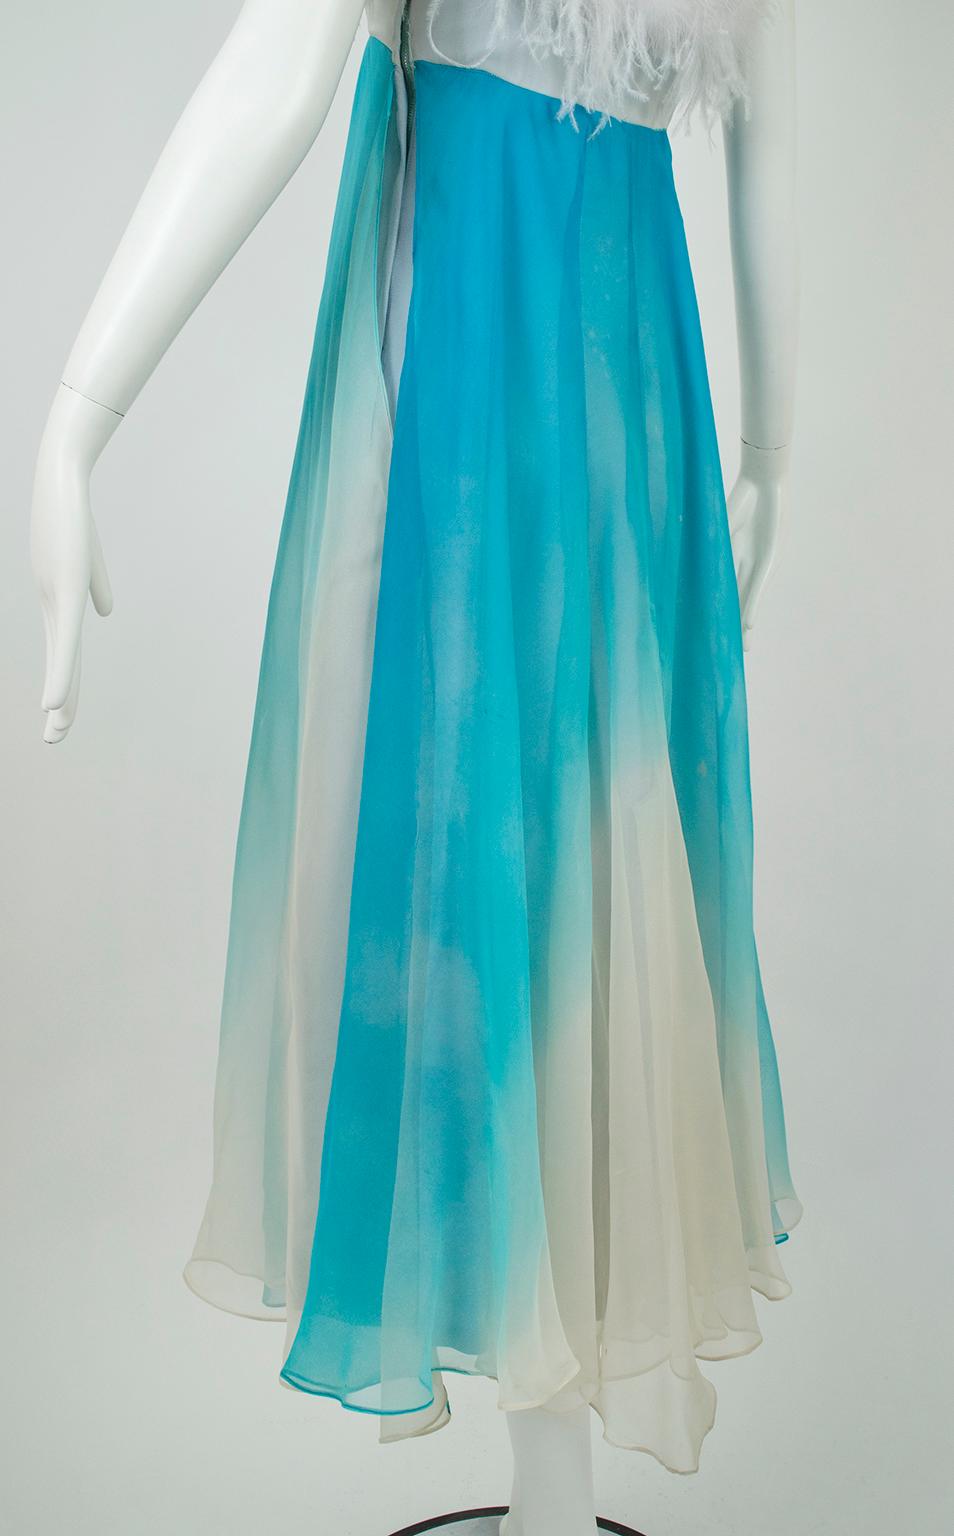 Aqua Ombré Tie Dye Chiffon Ball Gown with Ostrich Feather Trim – XS, 1960s For Sale 4